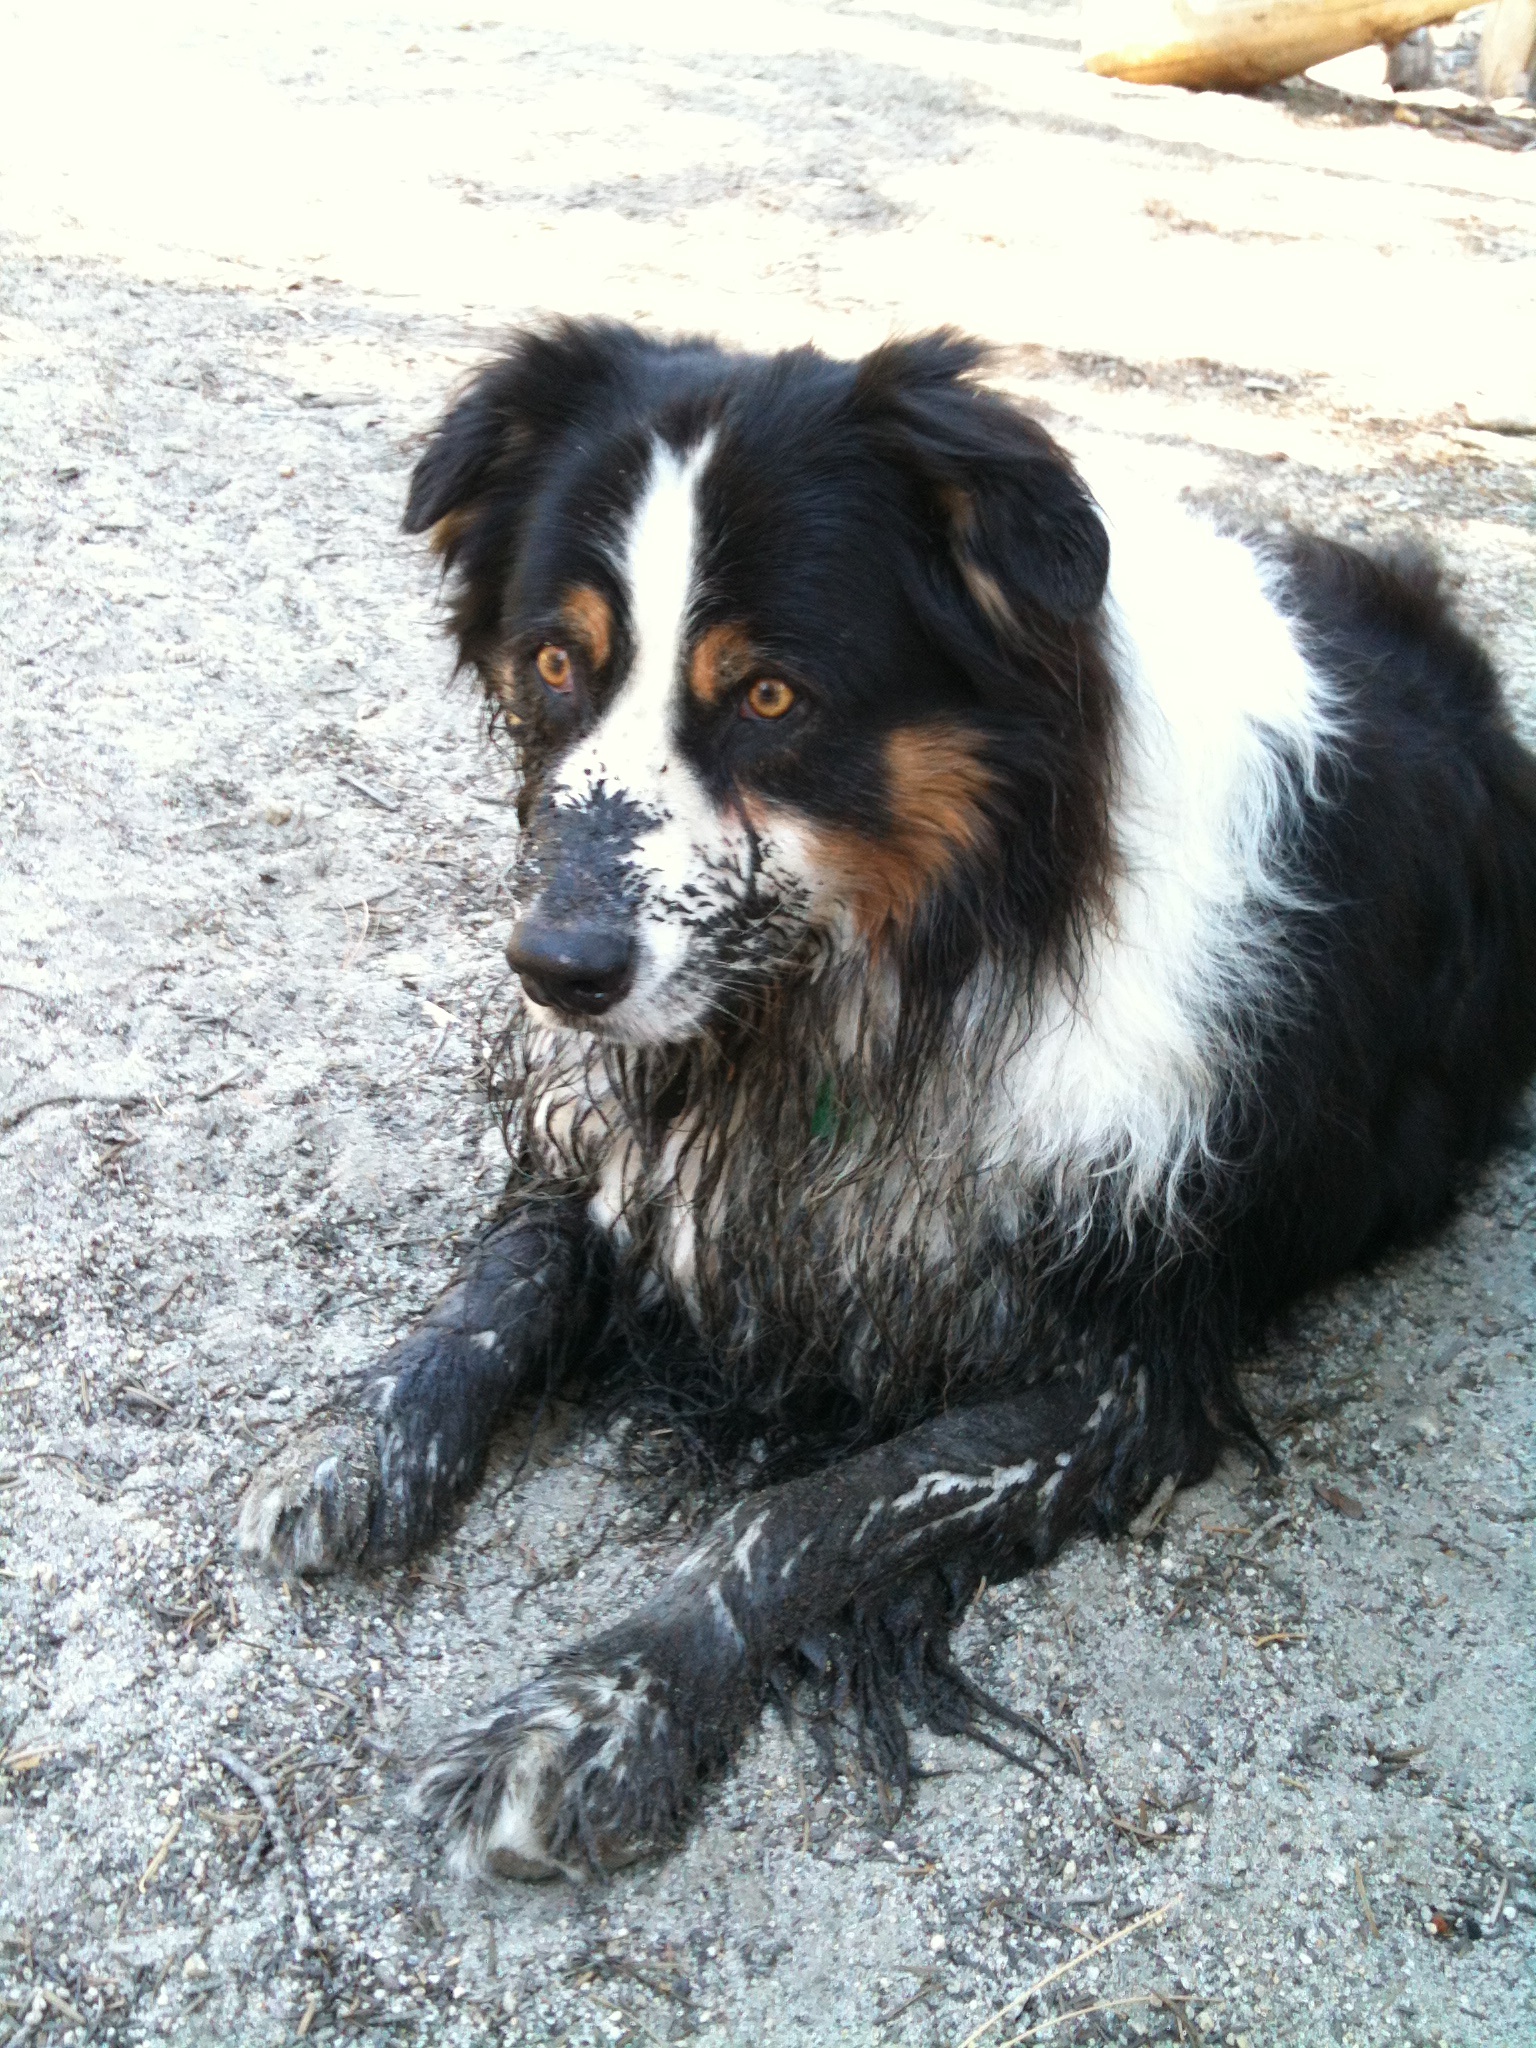 Buzz after finding "water" (a mud hole, actually...) on a hot day